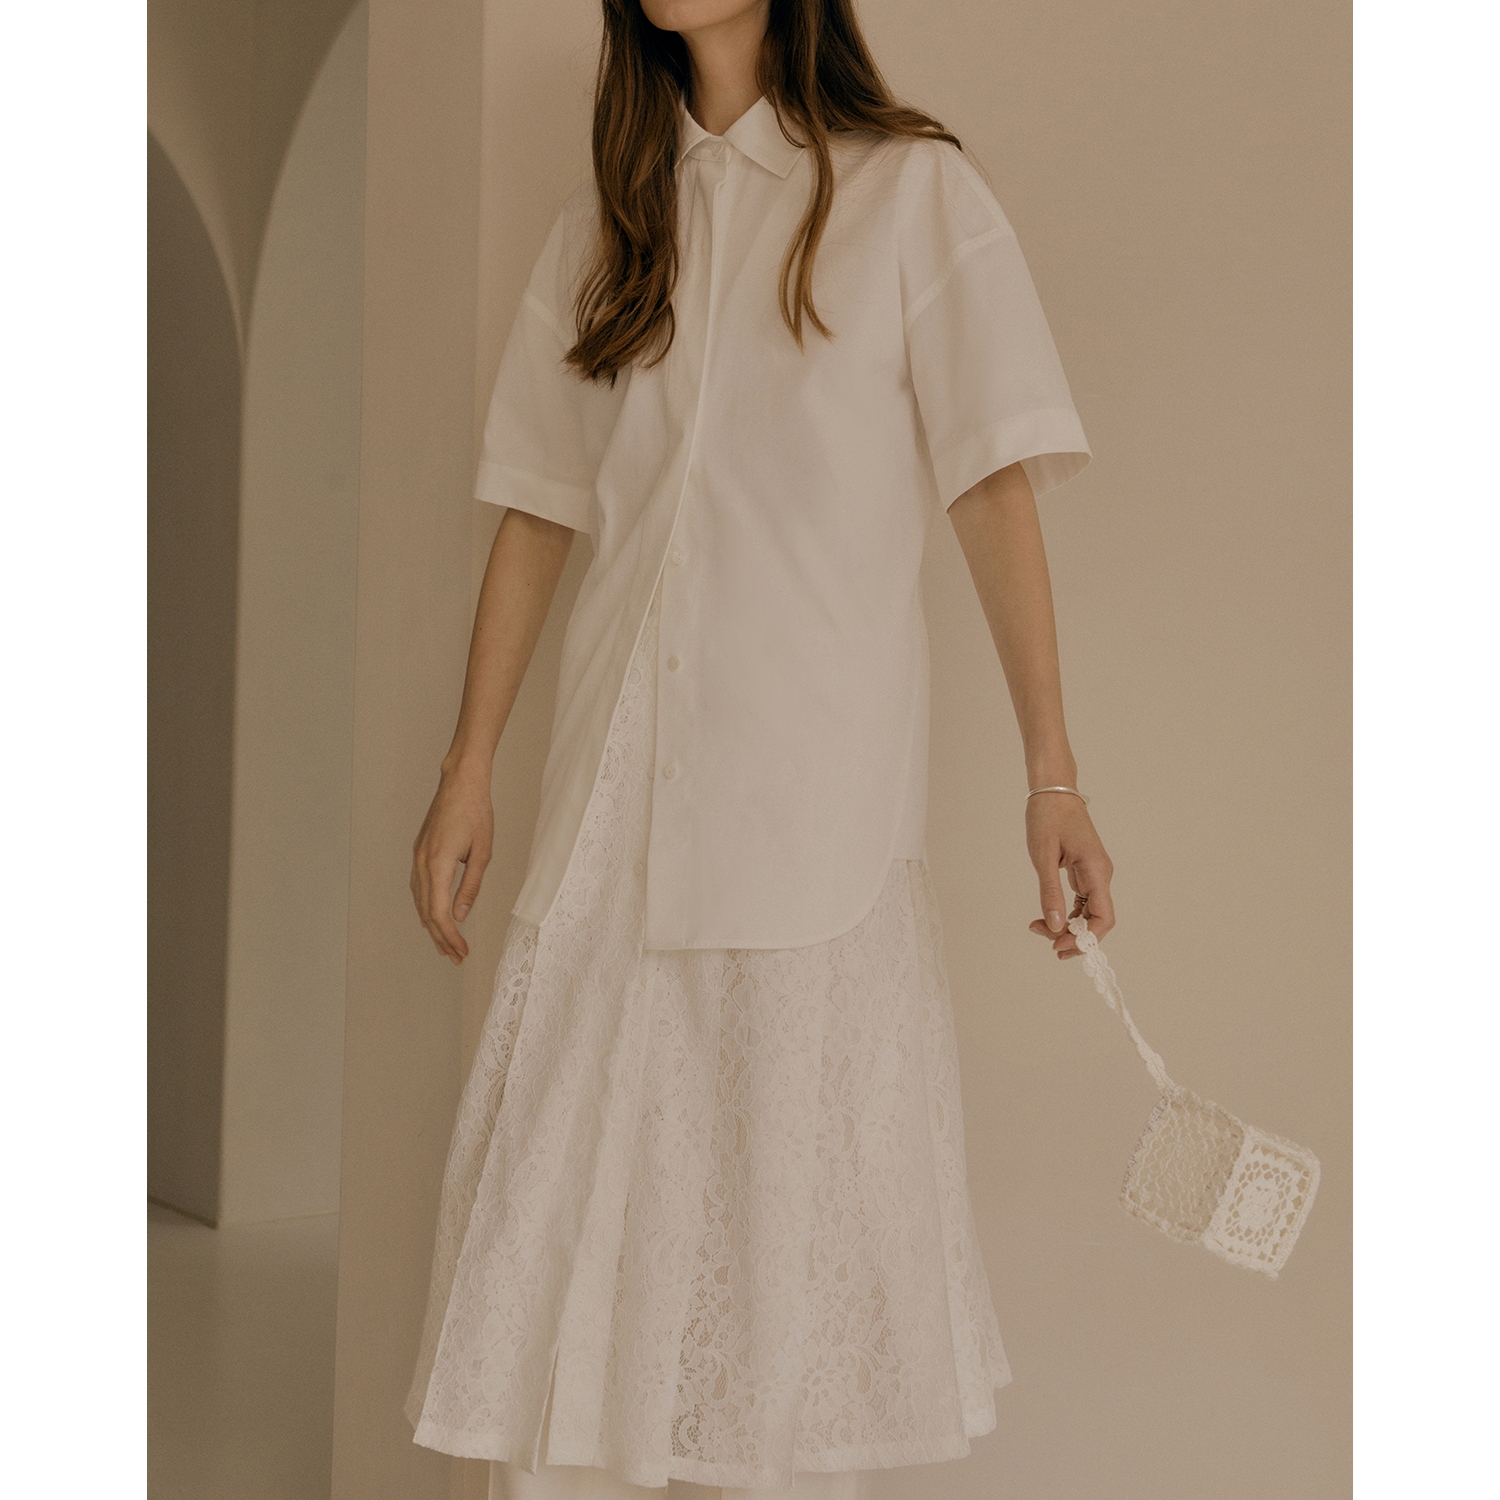 Short sleeve shirts with a pleated corded lace dress